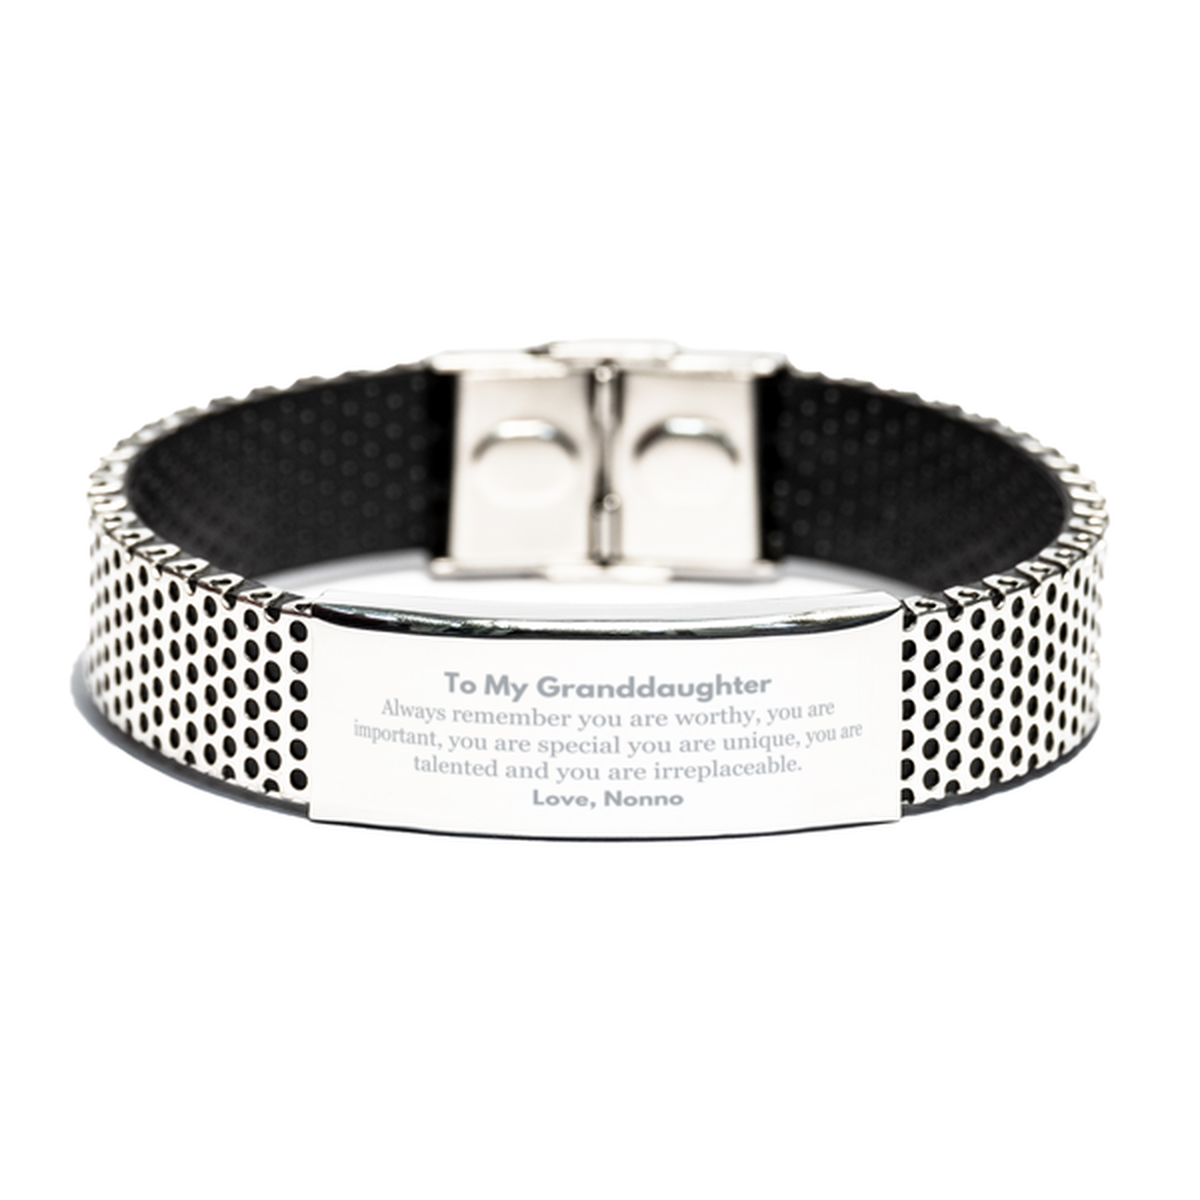 Granddaughter Birthday Gifts from Nonno, Inspirational Stainless Steel Bracelet for Granddaughter Christmas Graduation Gifts for Granddaughter Always remember you are worthy, you are important. Love, Nonno